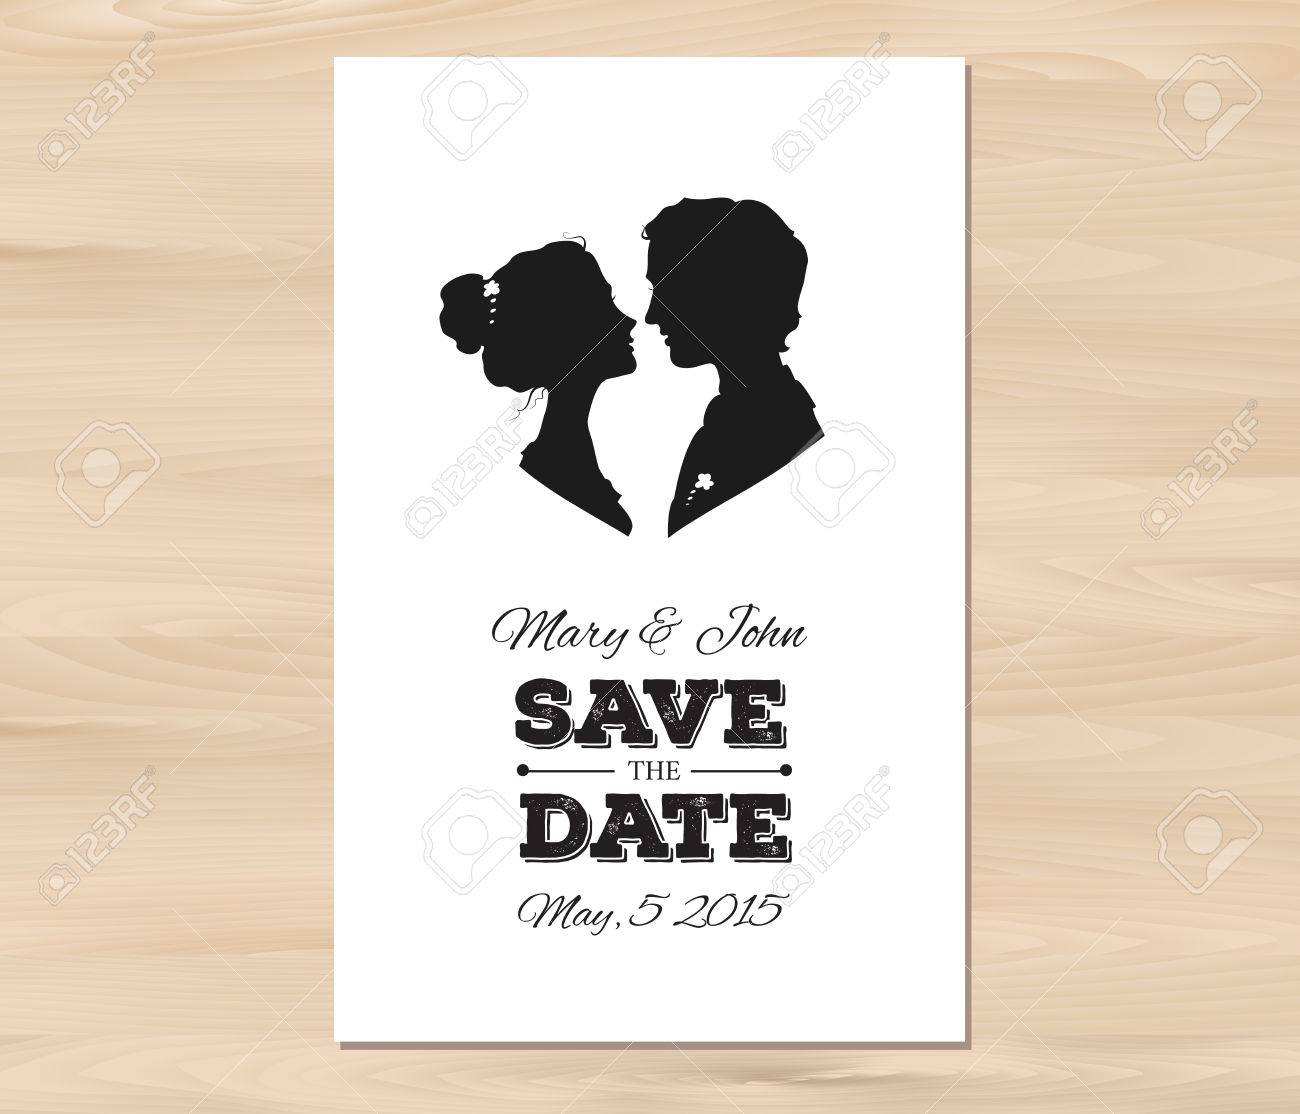 21 Free Save The Date Wedding Invitation Template Vector Photo with Save The Date Wedding Invitation Template Vector